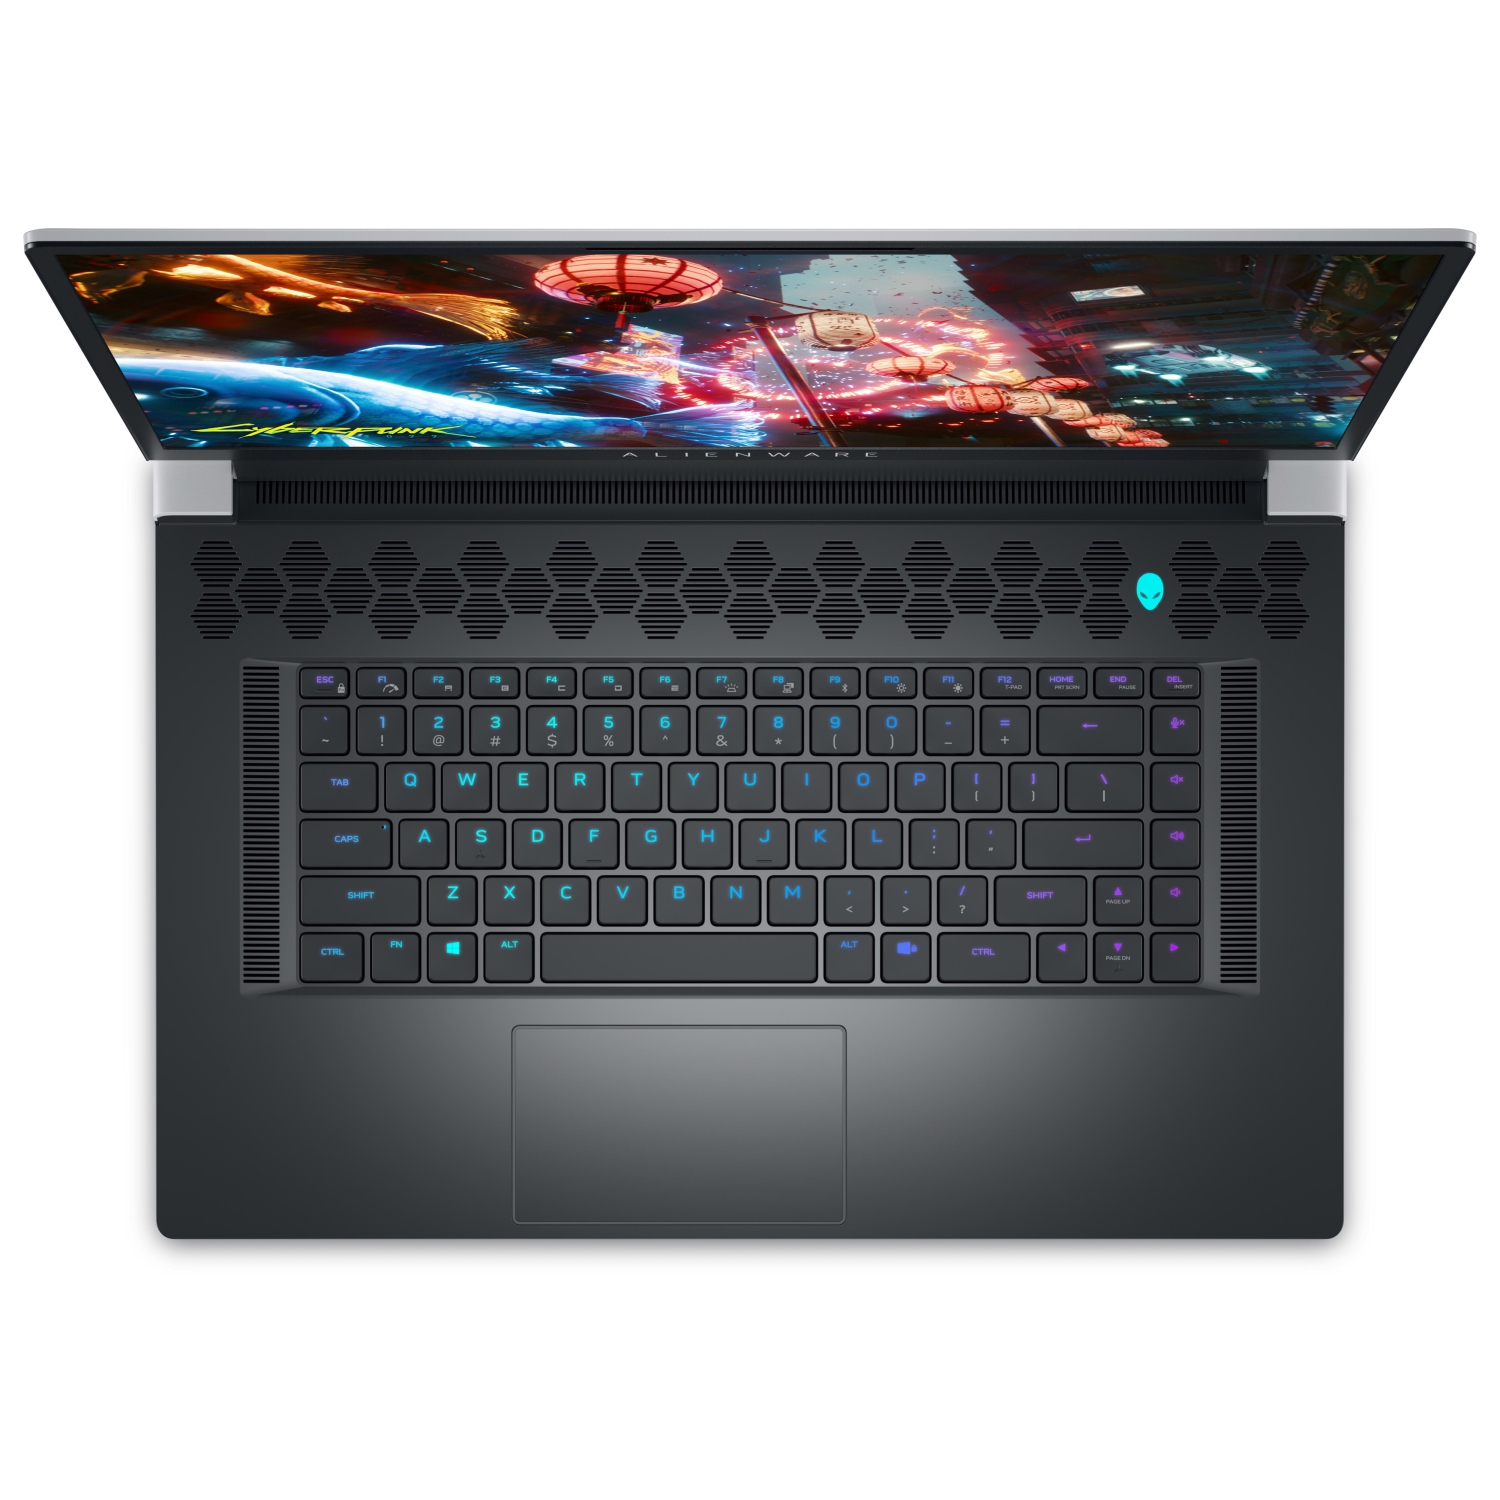 Refurbished (Excellent) – Dell Alienware X17 R2 Gaming Laptop (2022) | 17.3" FHD | Core i7 - 2TB SSD - 64GB RAM - 3080 Ti | 14 Cores @ 4.7 GHz - 12th Gen CPU - 12GB GDDR6X